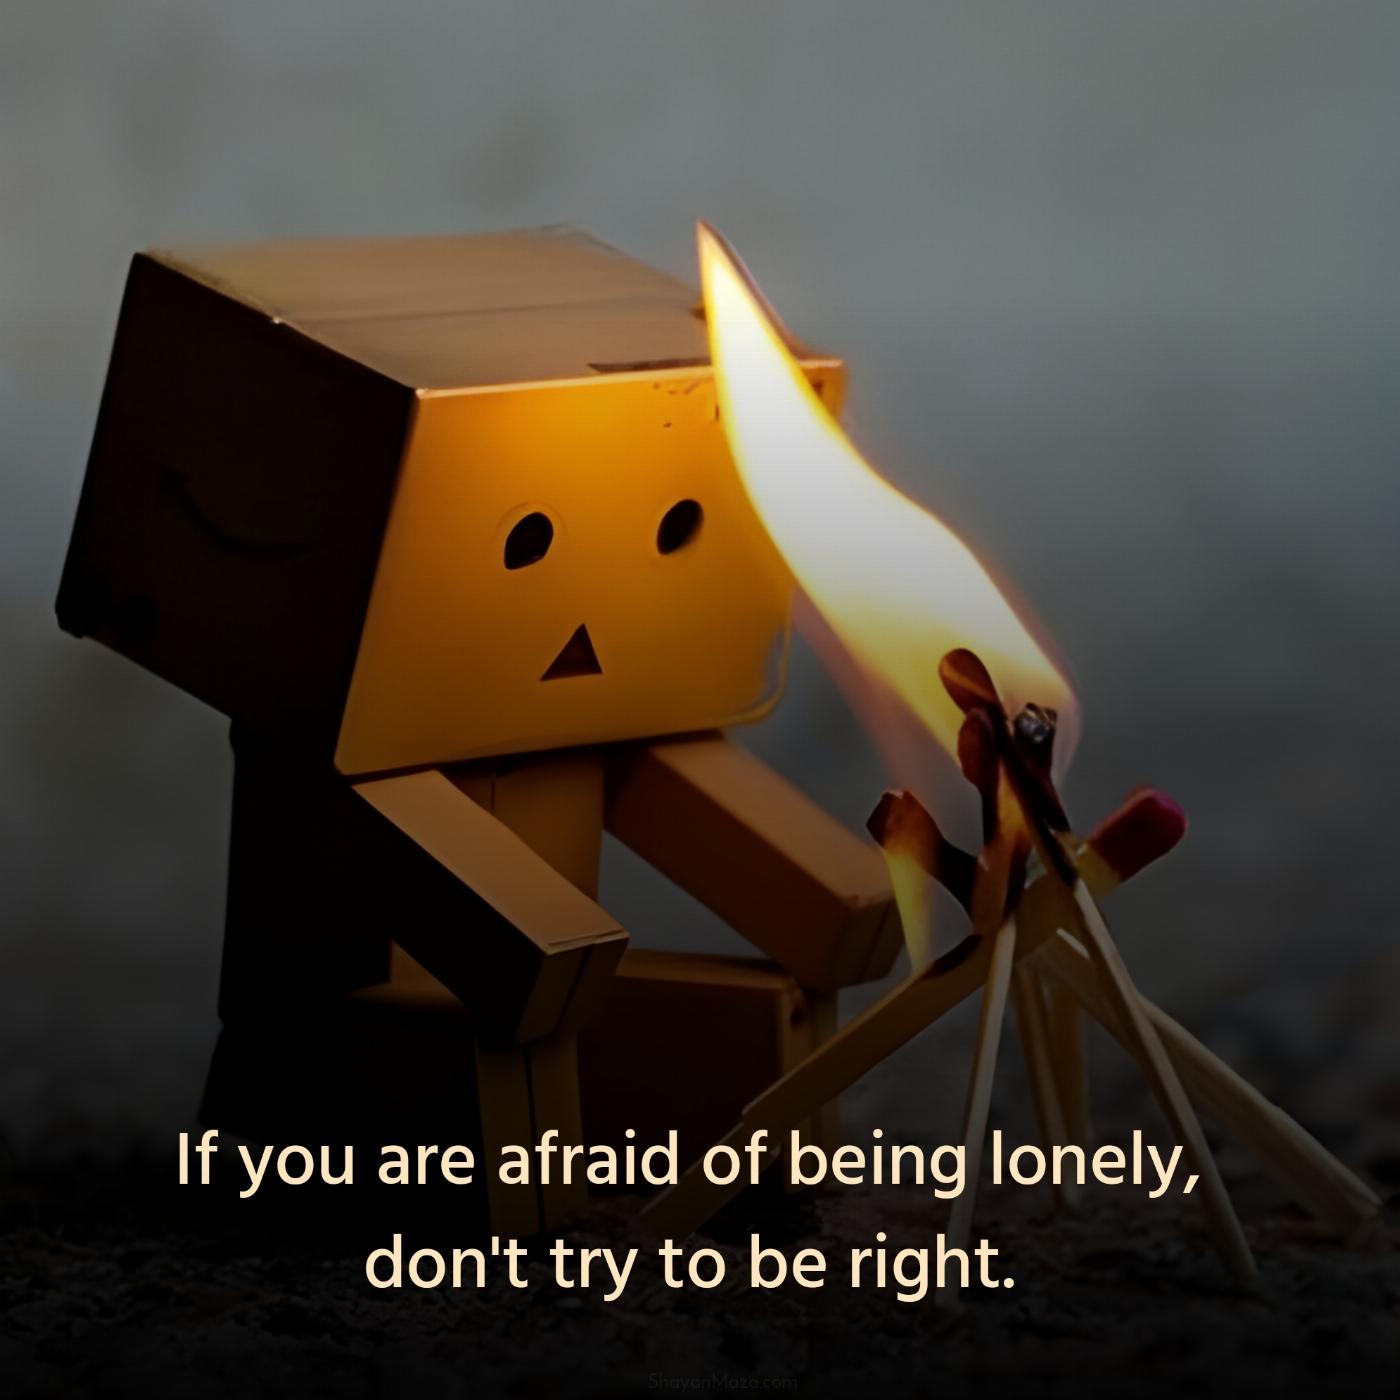 If you are afraid of being lonely don't try to be right